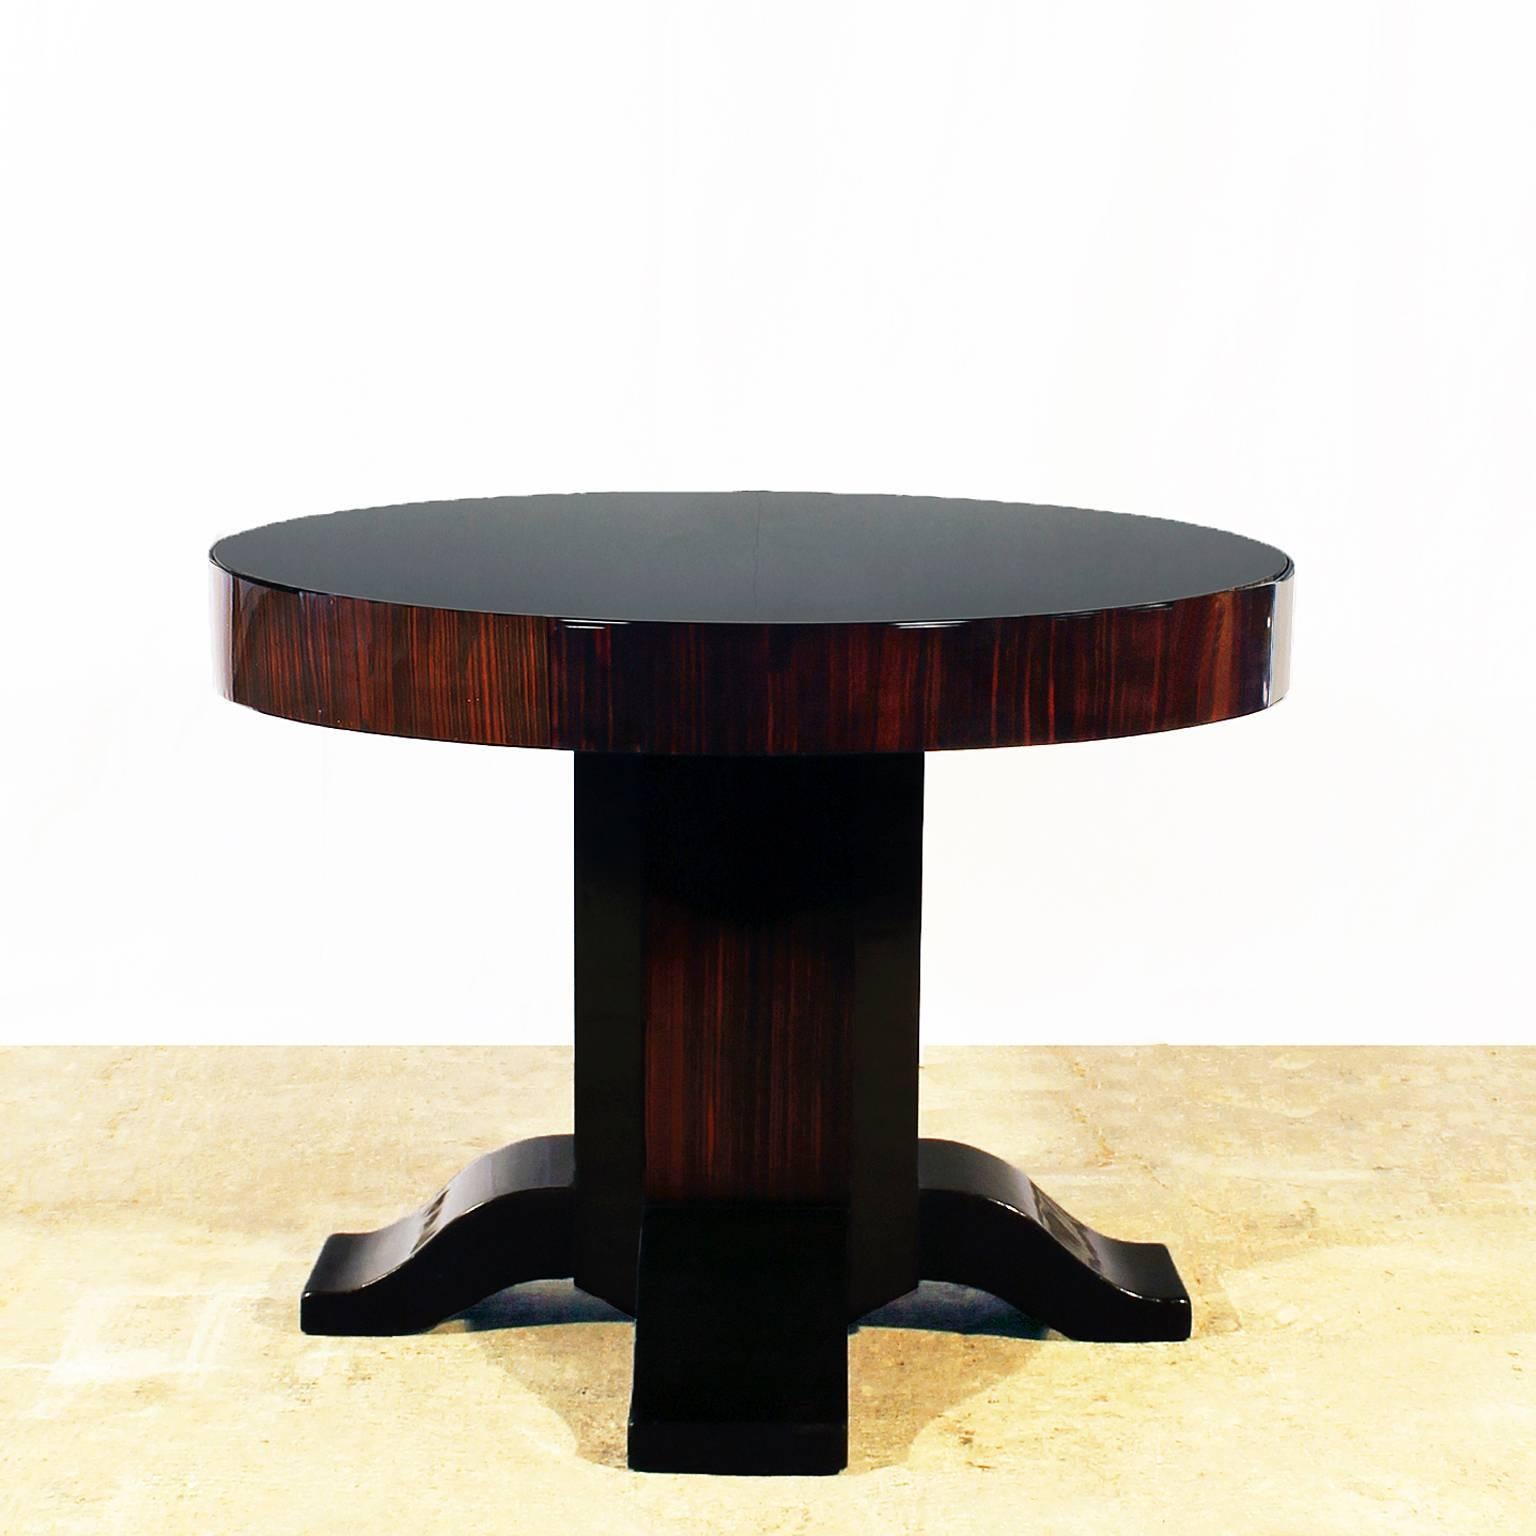 Large Art Deco side table, solid mahogany and Macassar ebony veneer, French polish, black opaline on top, coming from a Nice´s grand Hotel.

France, circa 1930.